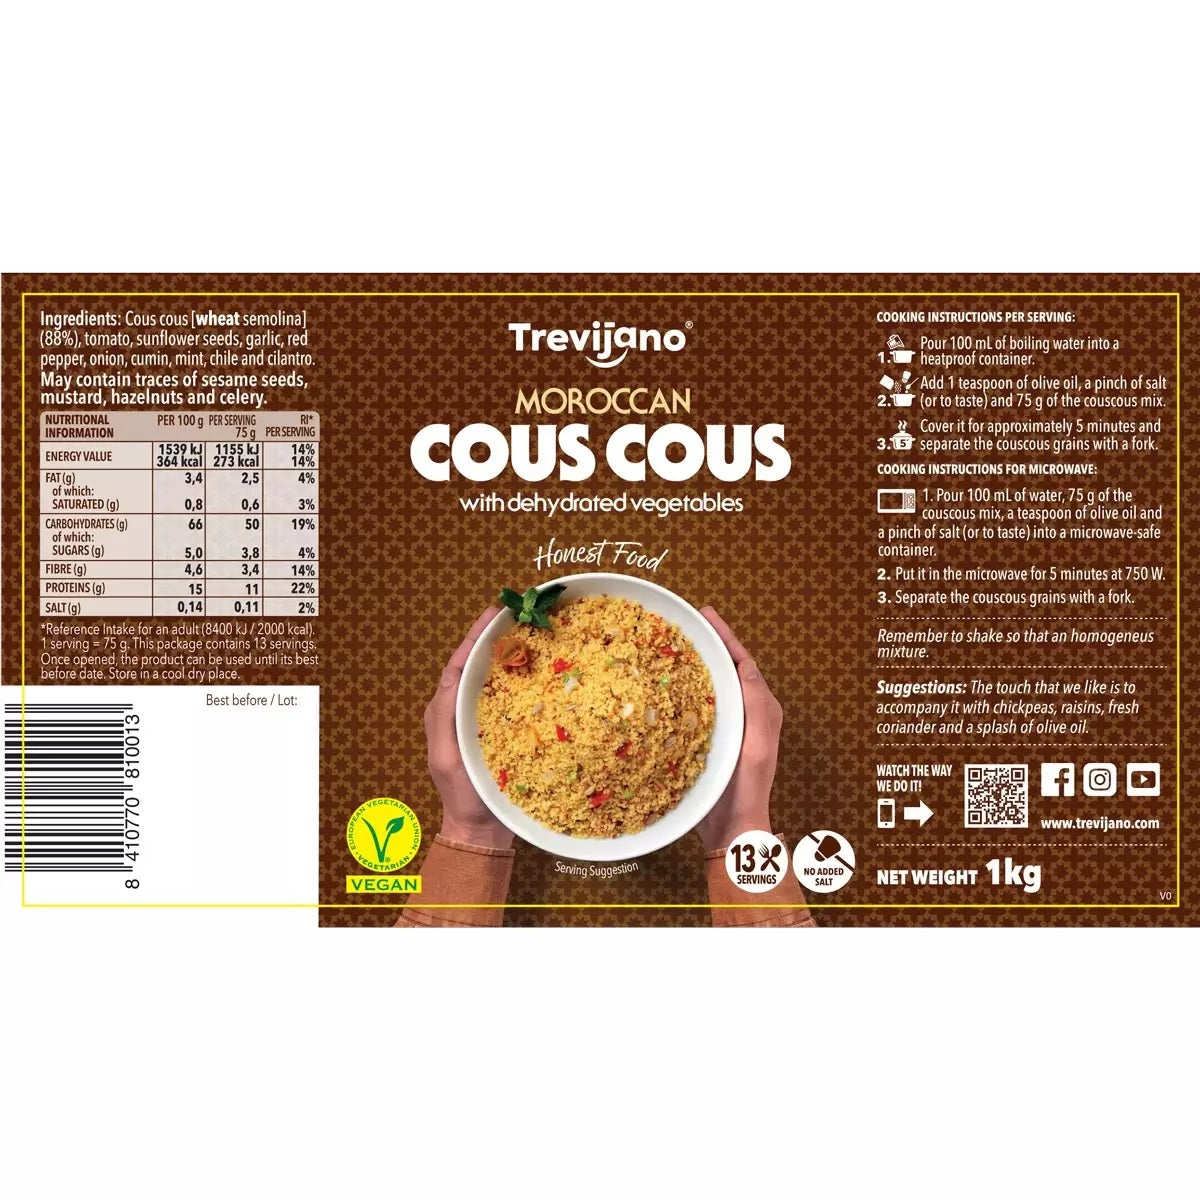 Trevijano Moroccan Couscous with Vegetables 1kg Ingredients